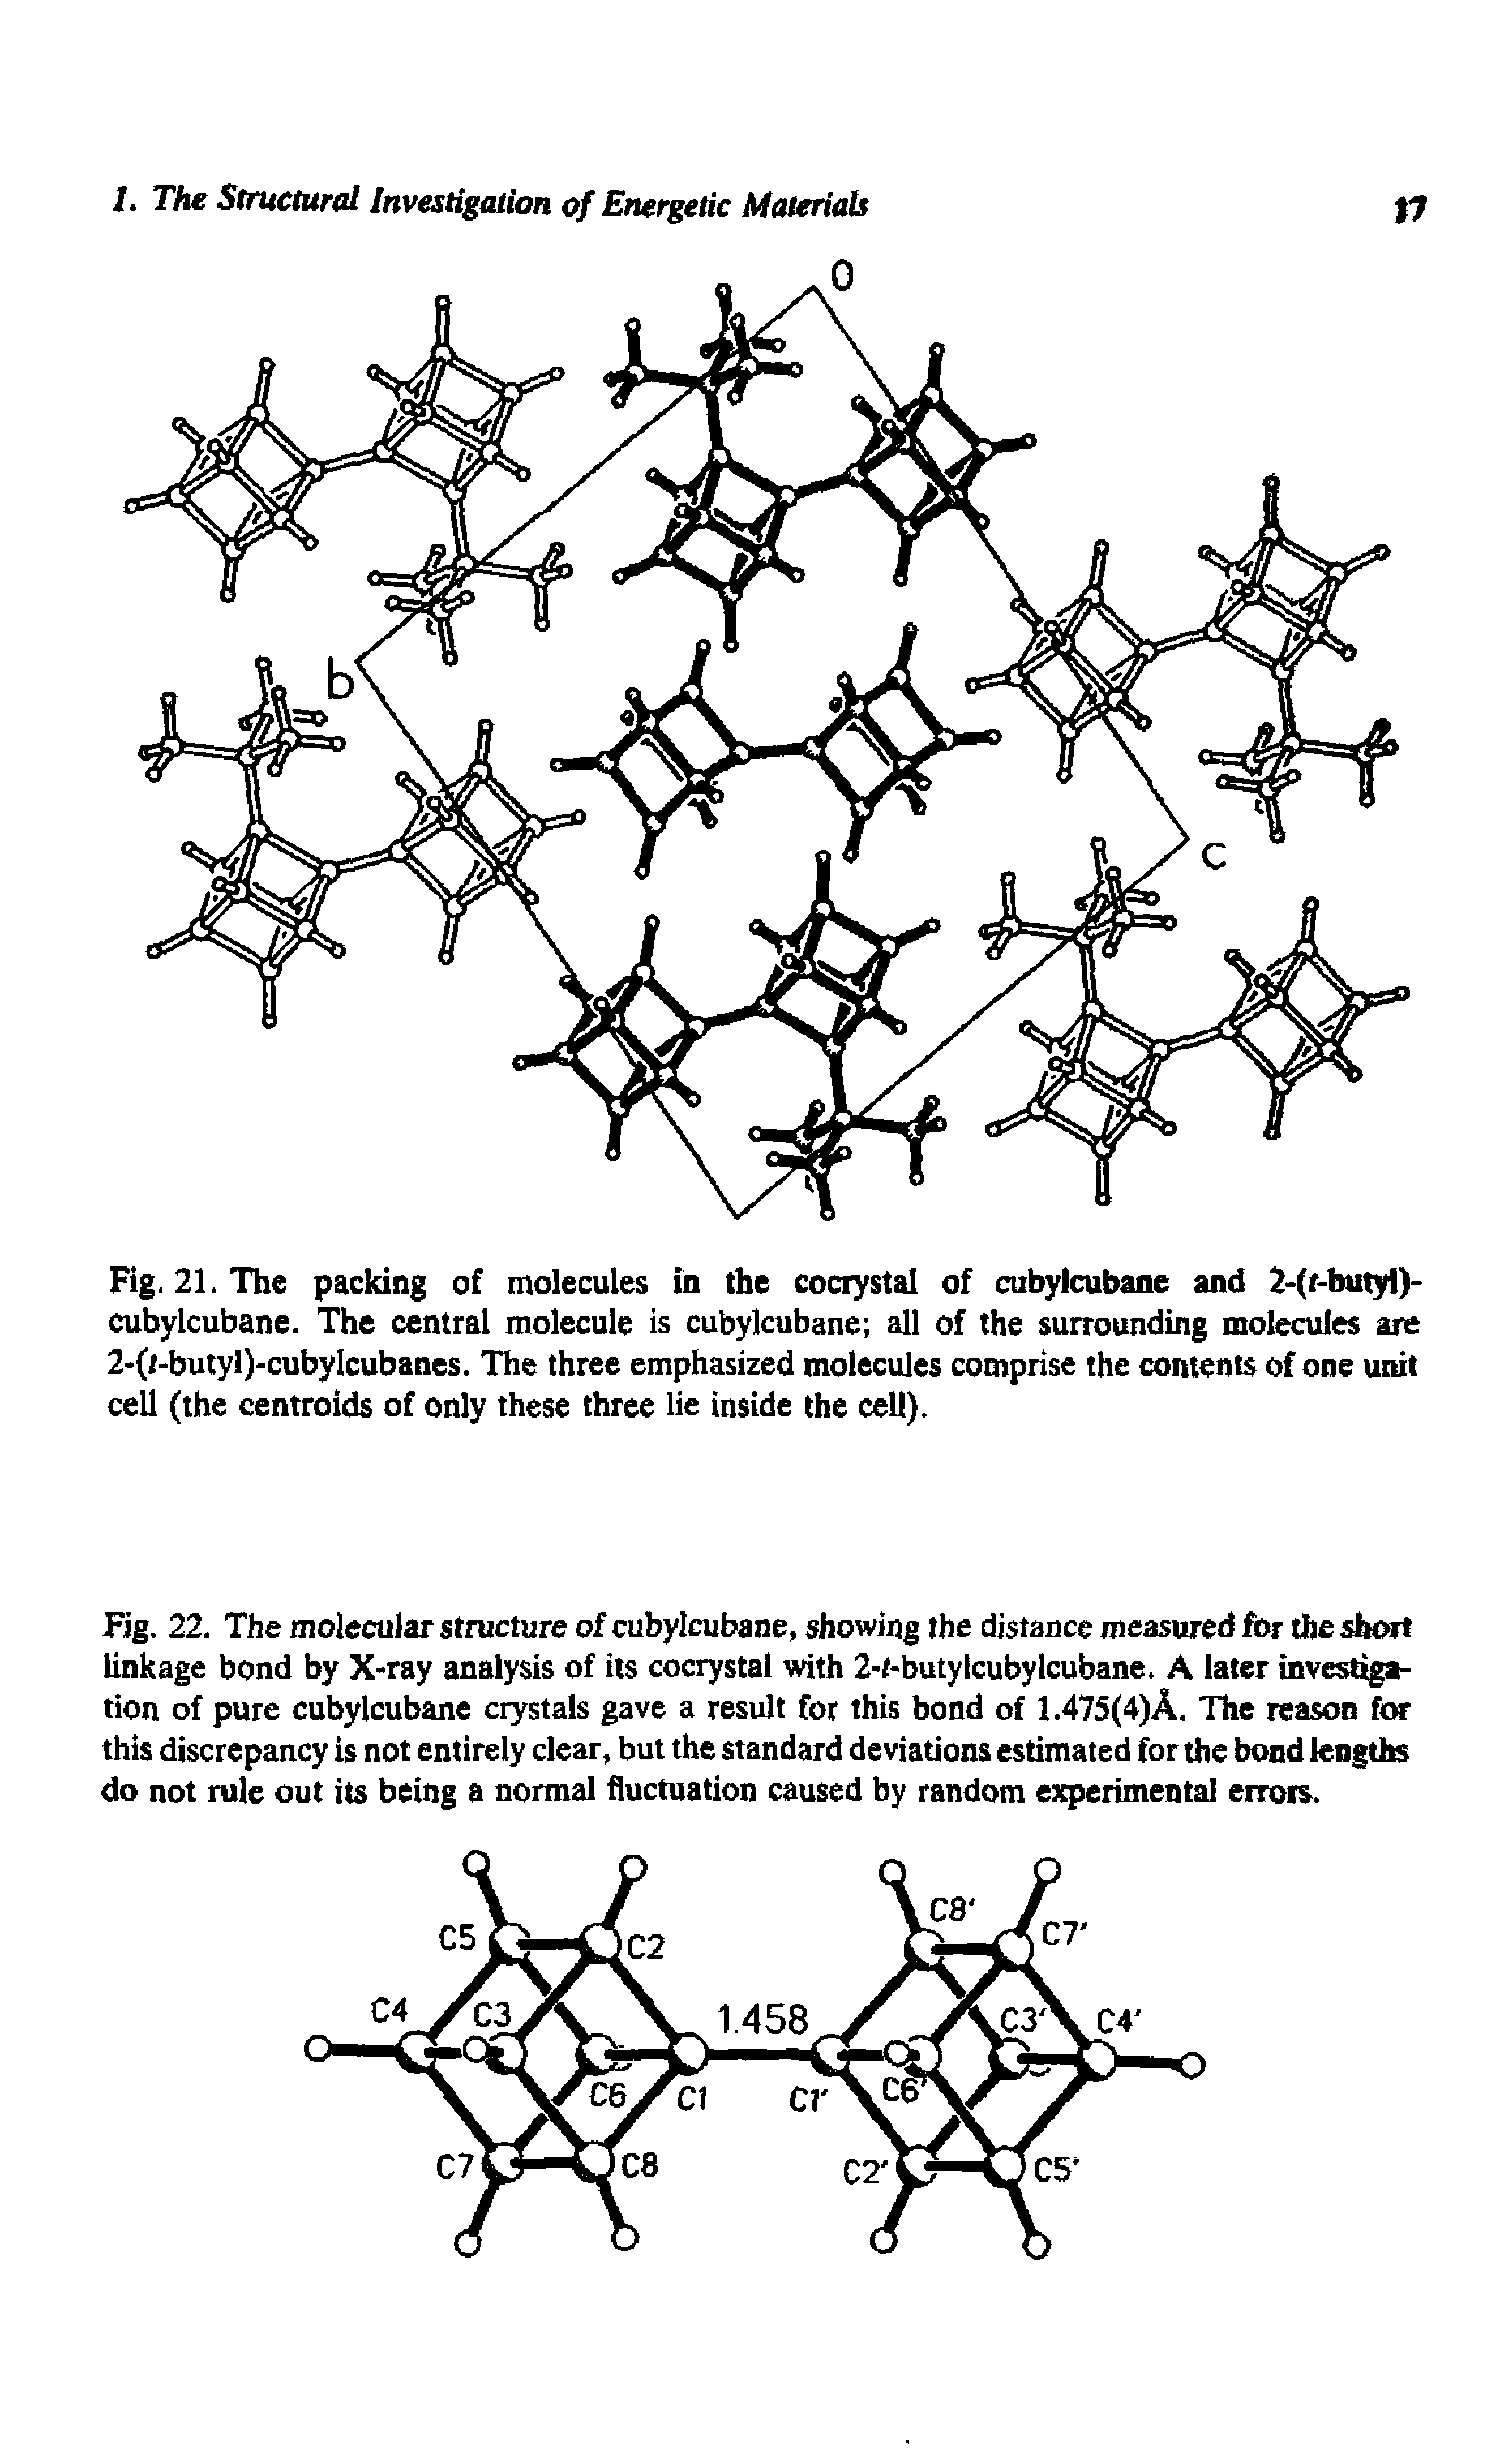 Fig. 22. The molecular structure of cubylcubane, showing the distance measured for the short linkage bond by X-ray analysis of its cocrystal with 2-t-butylcubylcubane. A later investigation of pure cubylcubane crystals gave a result for this bond of 1.473(4)A. The reason for this discrepancy is not entirely clear, but the standard deviations estimated for the bond lengths do not rule out its being a normal fluctuation caused by random experimental eirois.